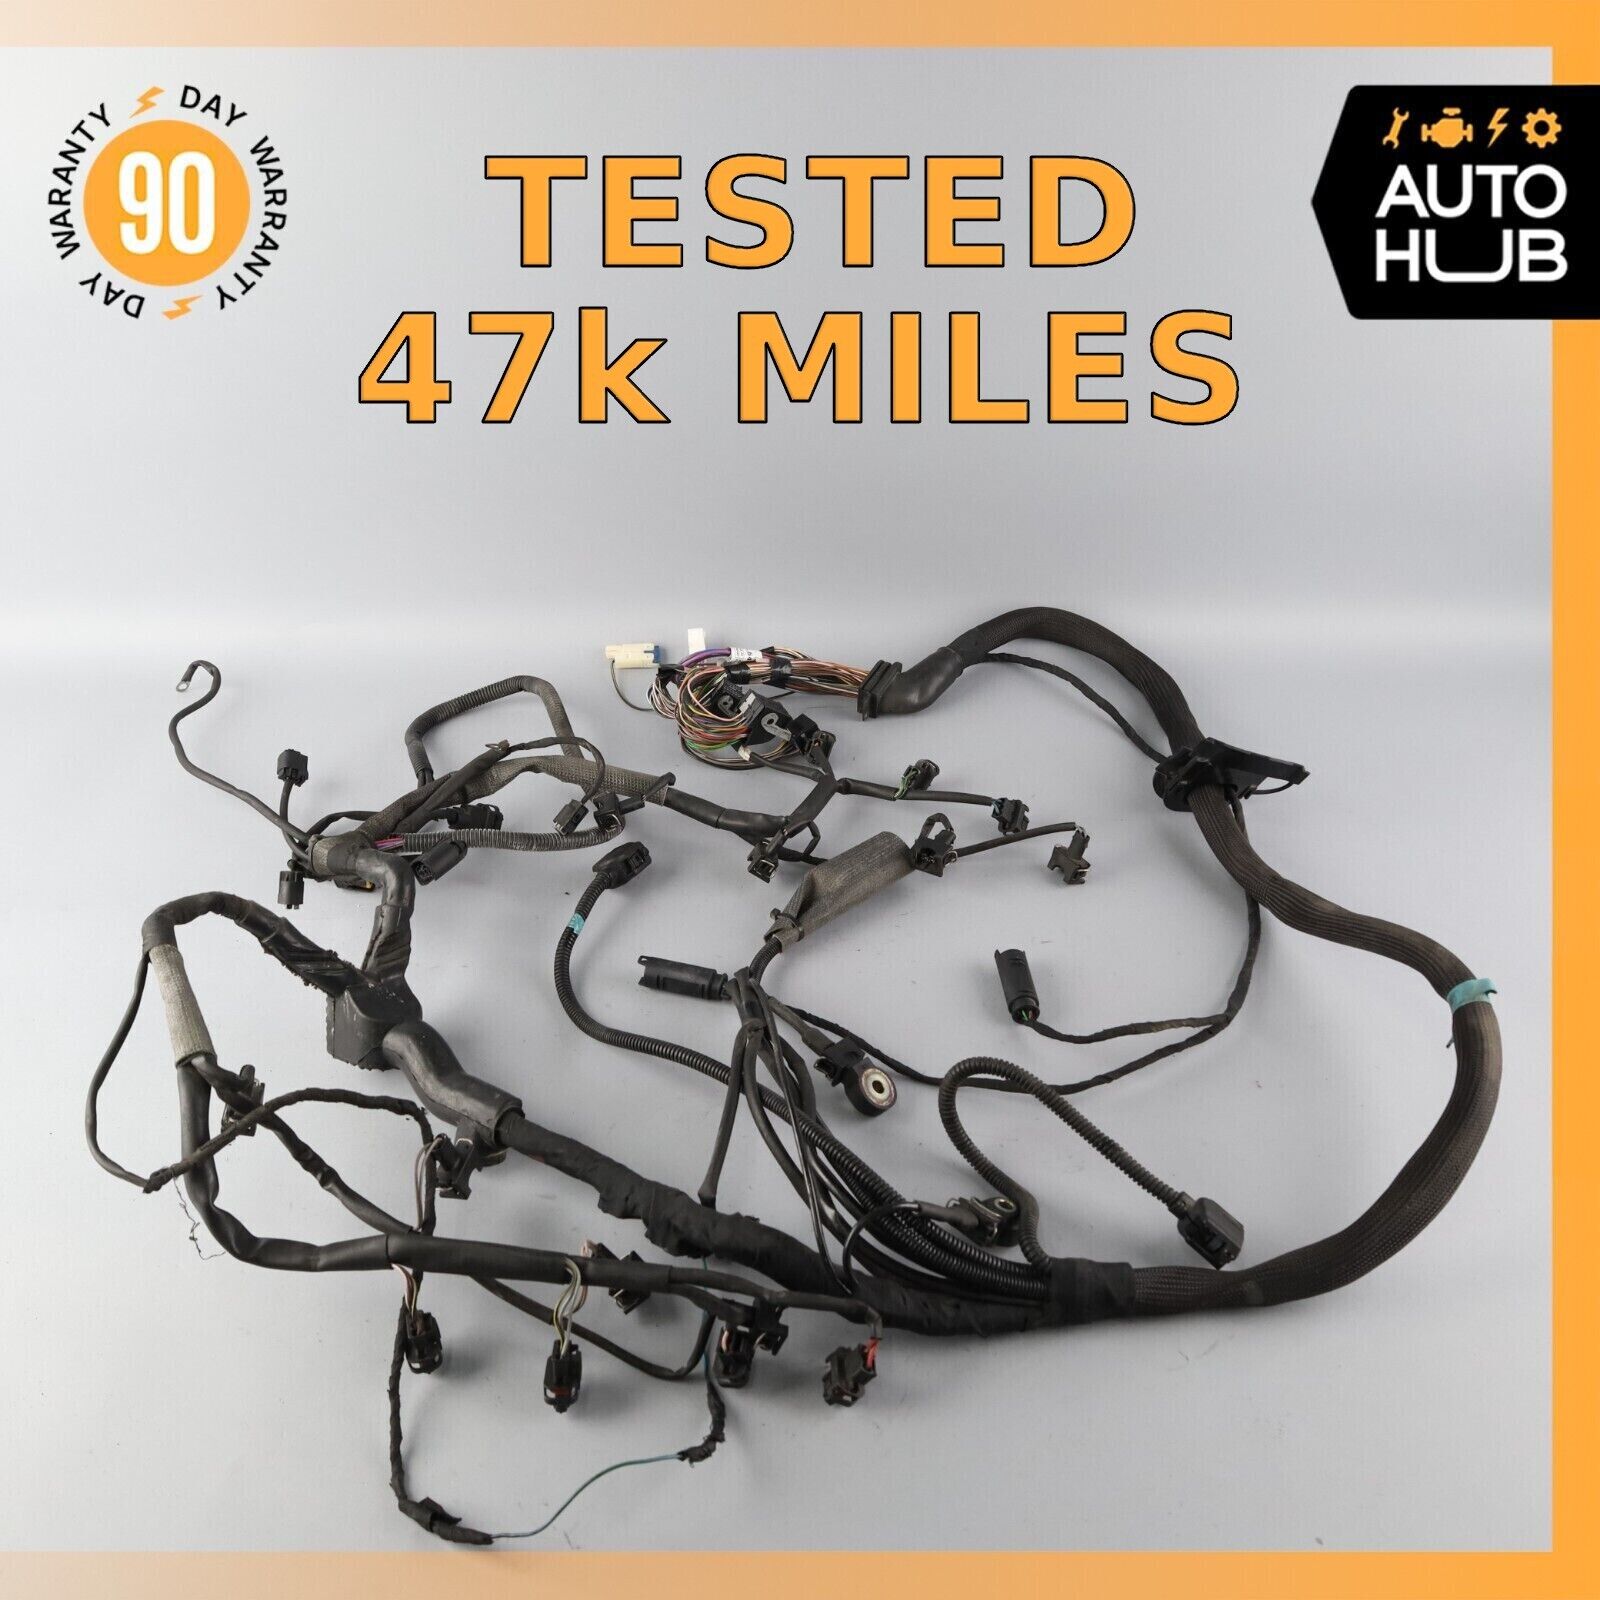 03-06 Mercedes W215 CL55 AMG Engine Motor Wire Wiring Harness 2205404033 OEM 47k